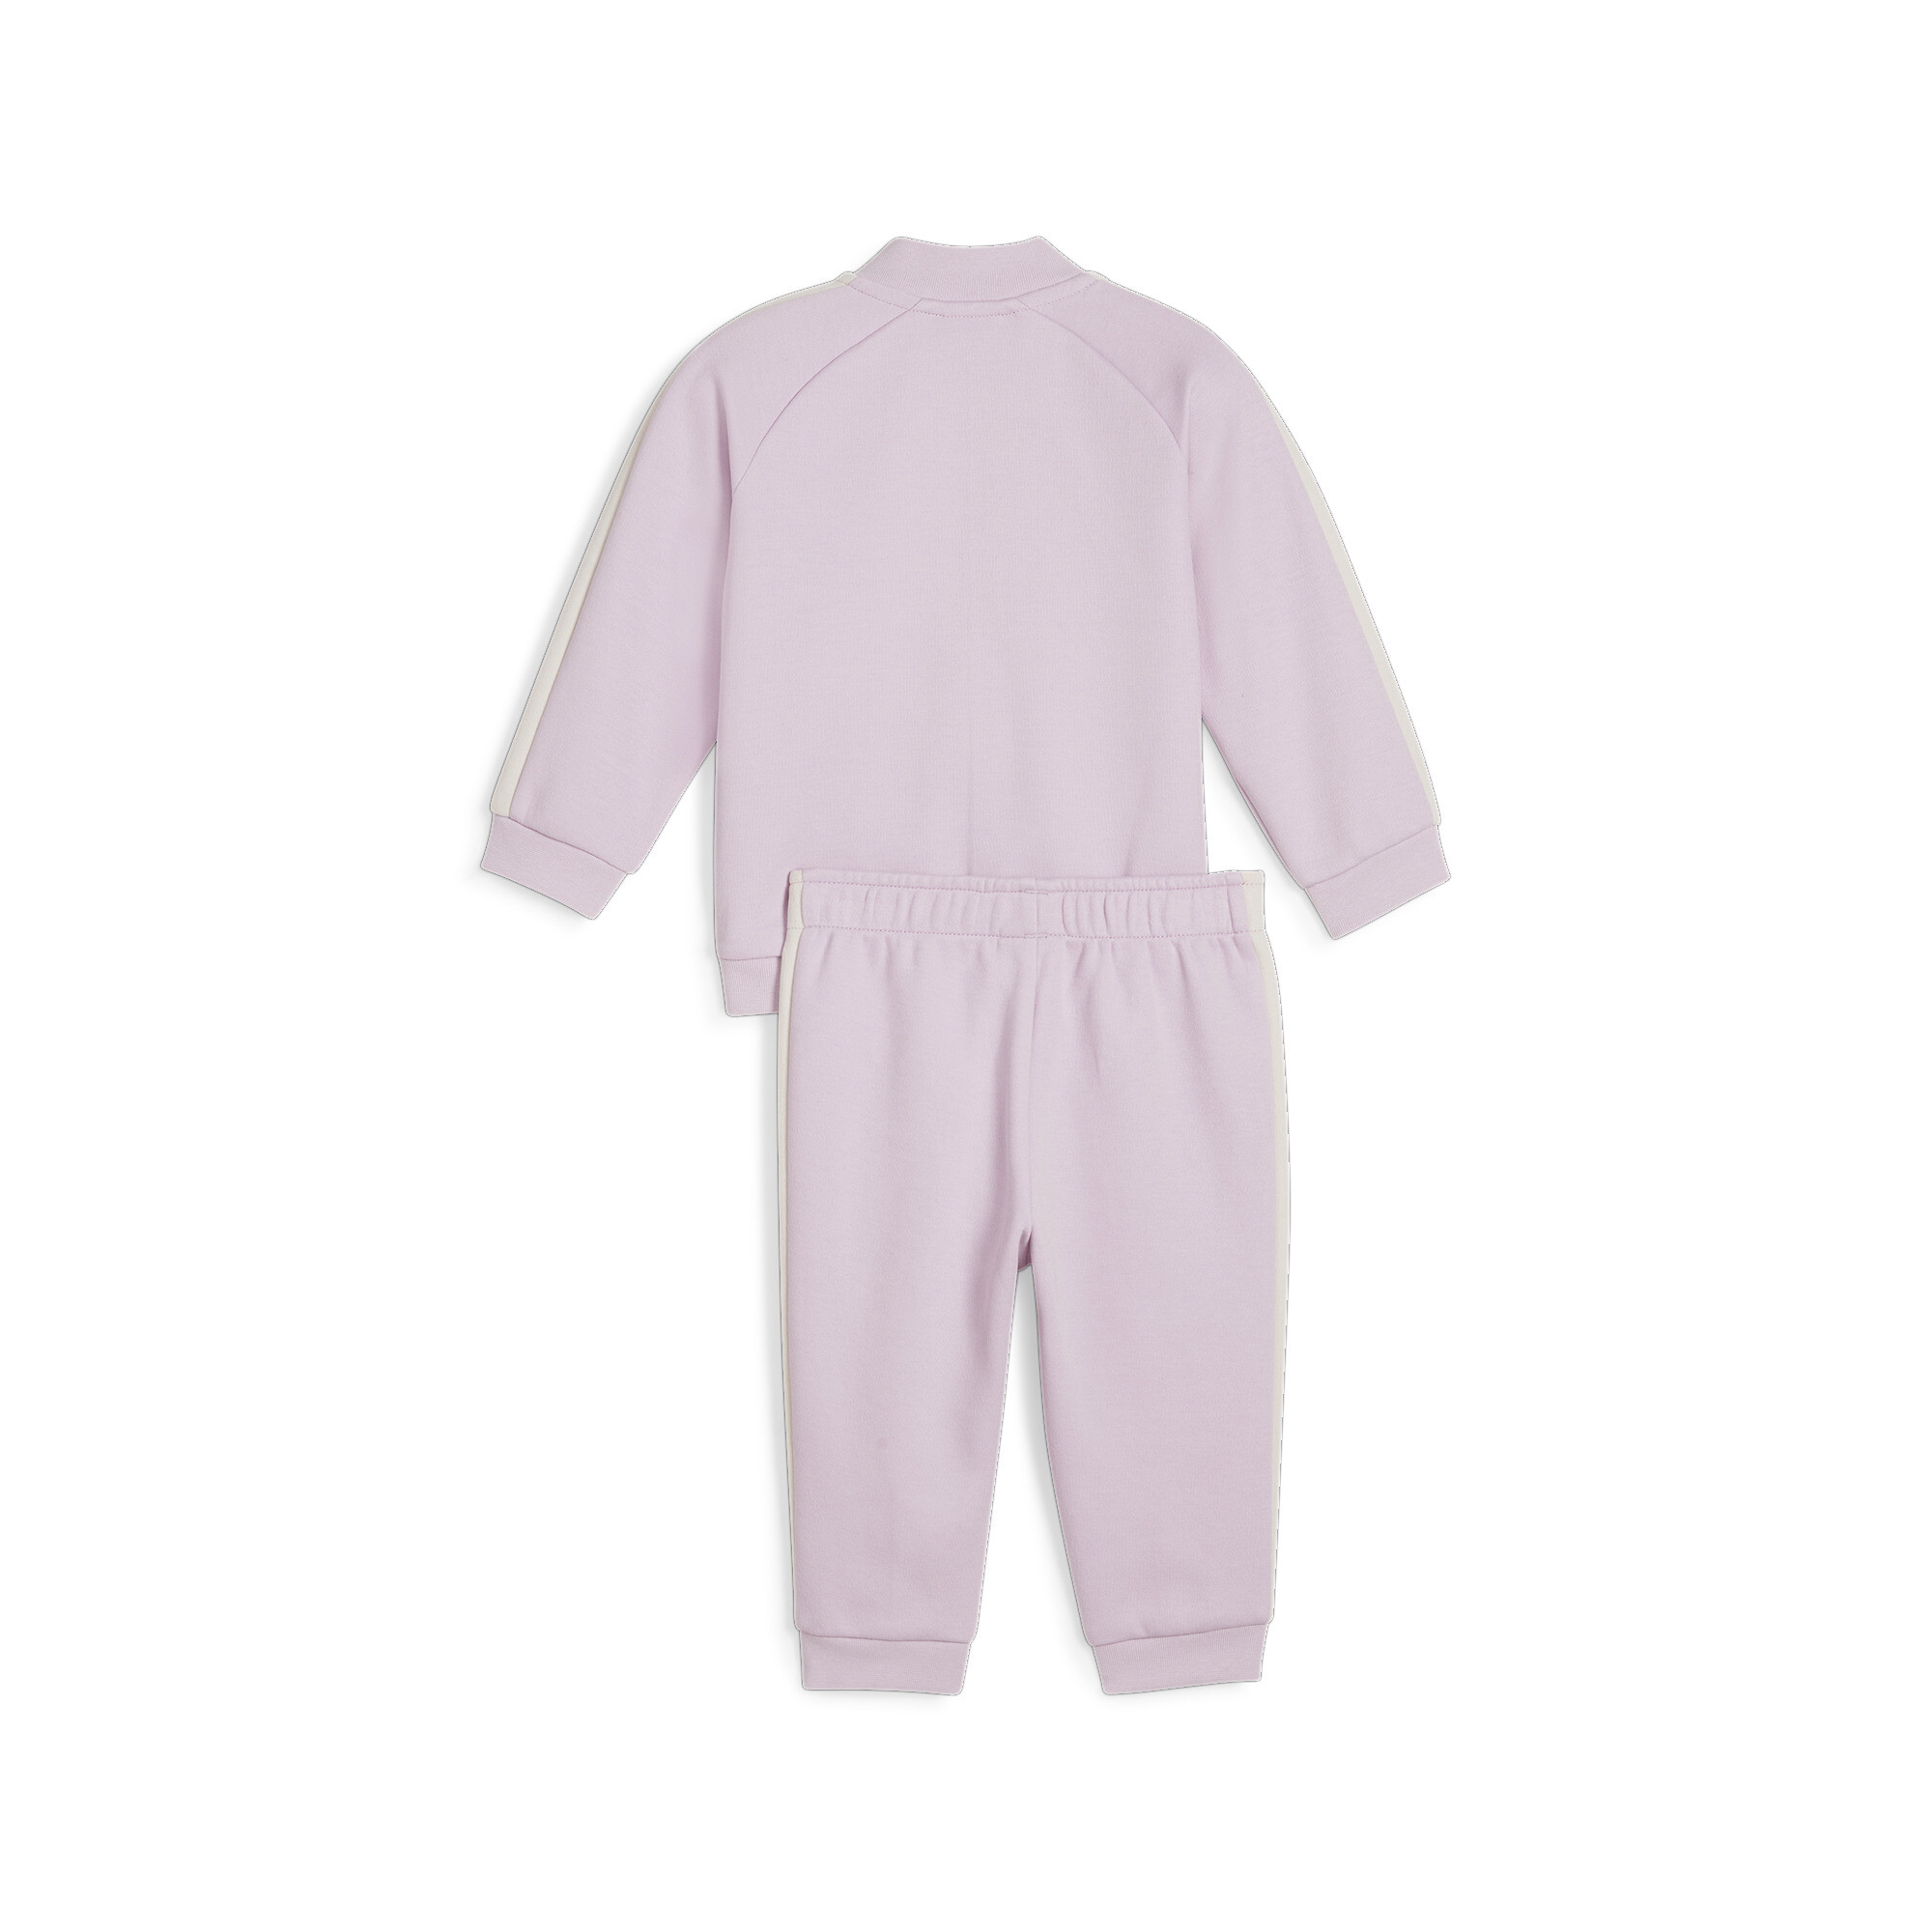 Kids' PUMA MINICATS T7 ICONIC Baby Tracksuit Set In 90 - Purple, Size 2-4 Months